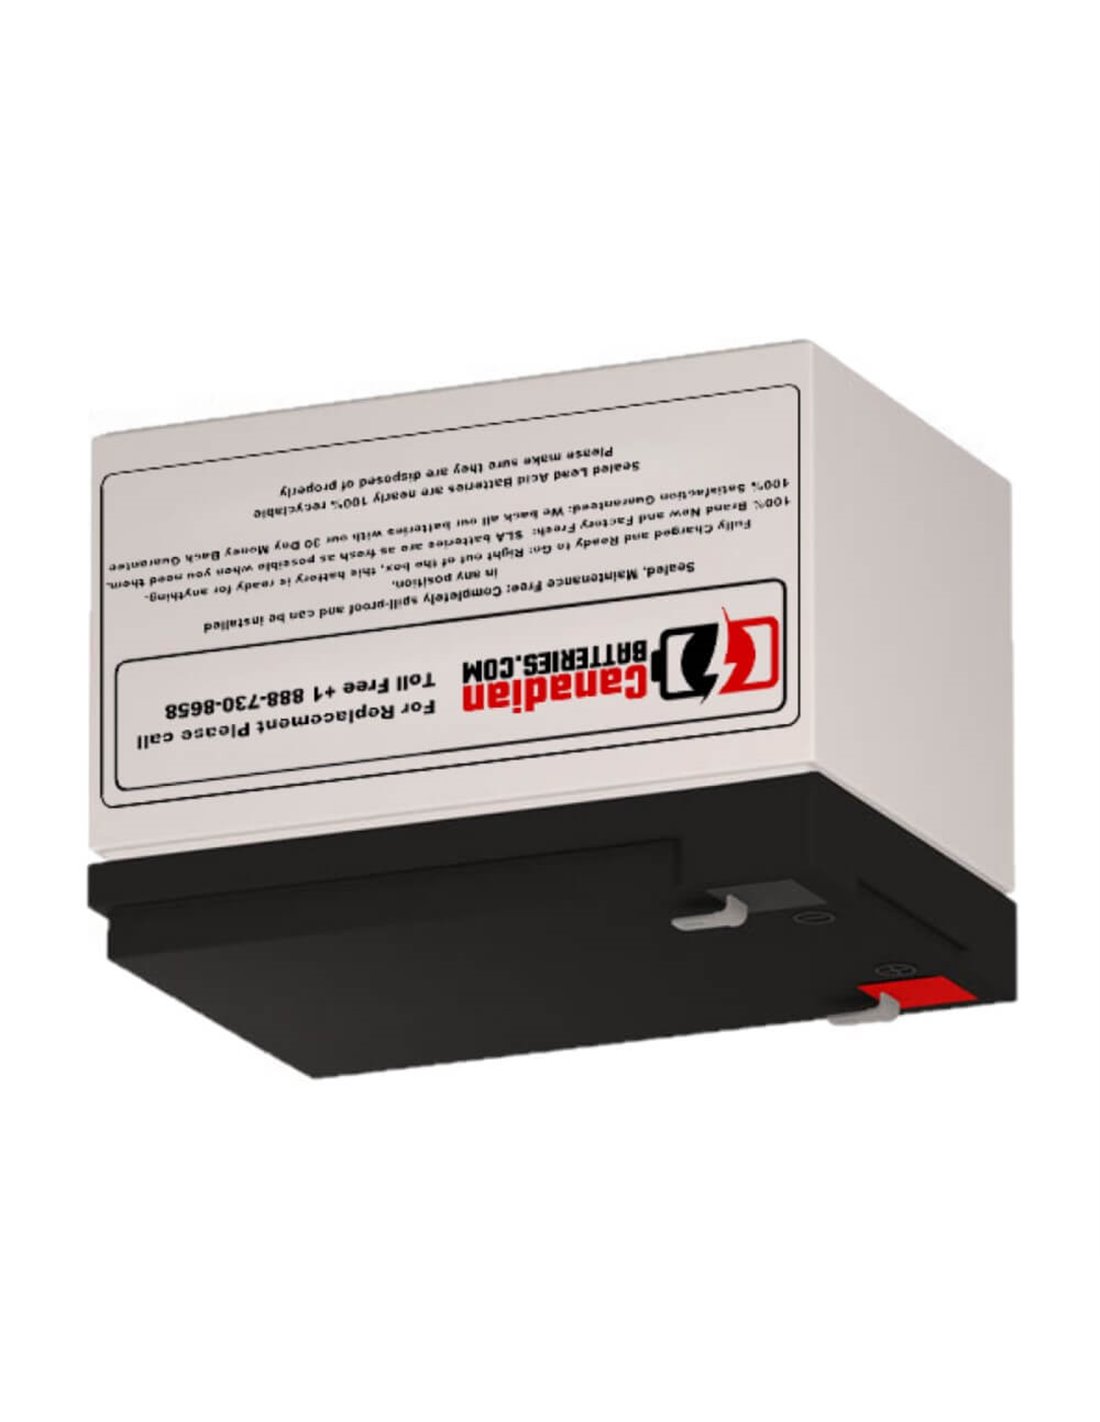 Battery for Powerware 58700026 UPS, 1 x 12V, 12Ah - 144Wh